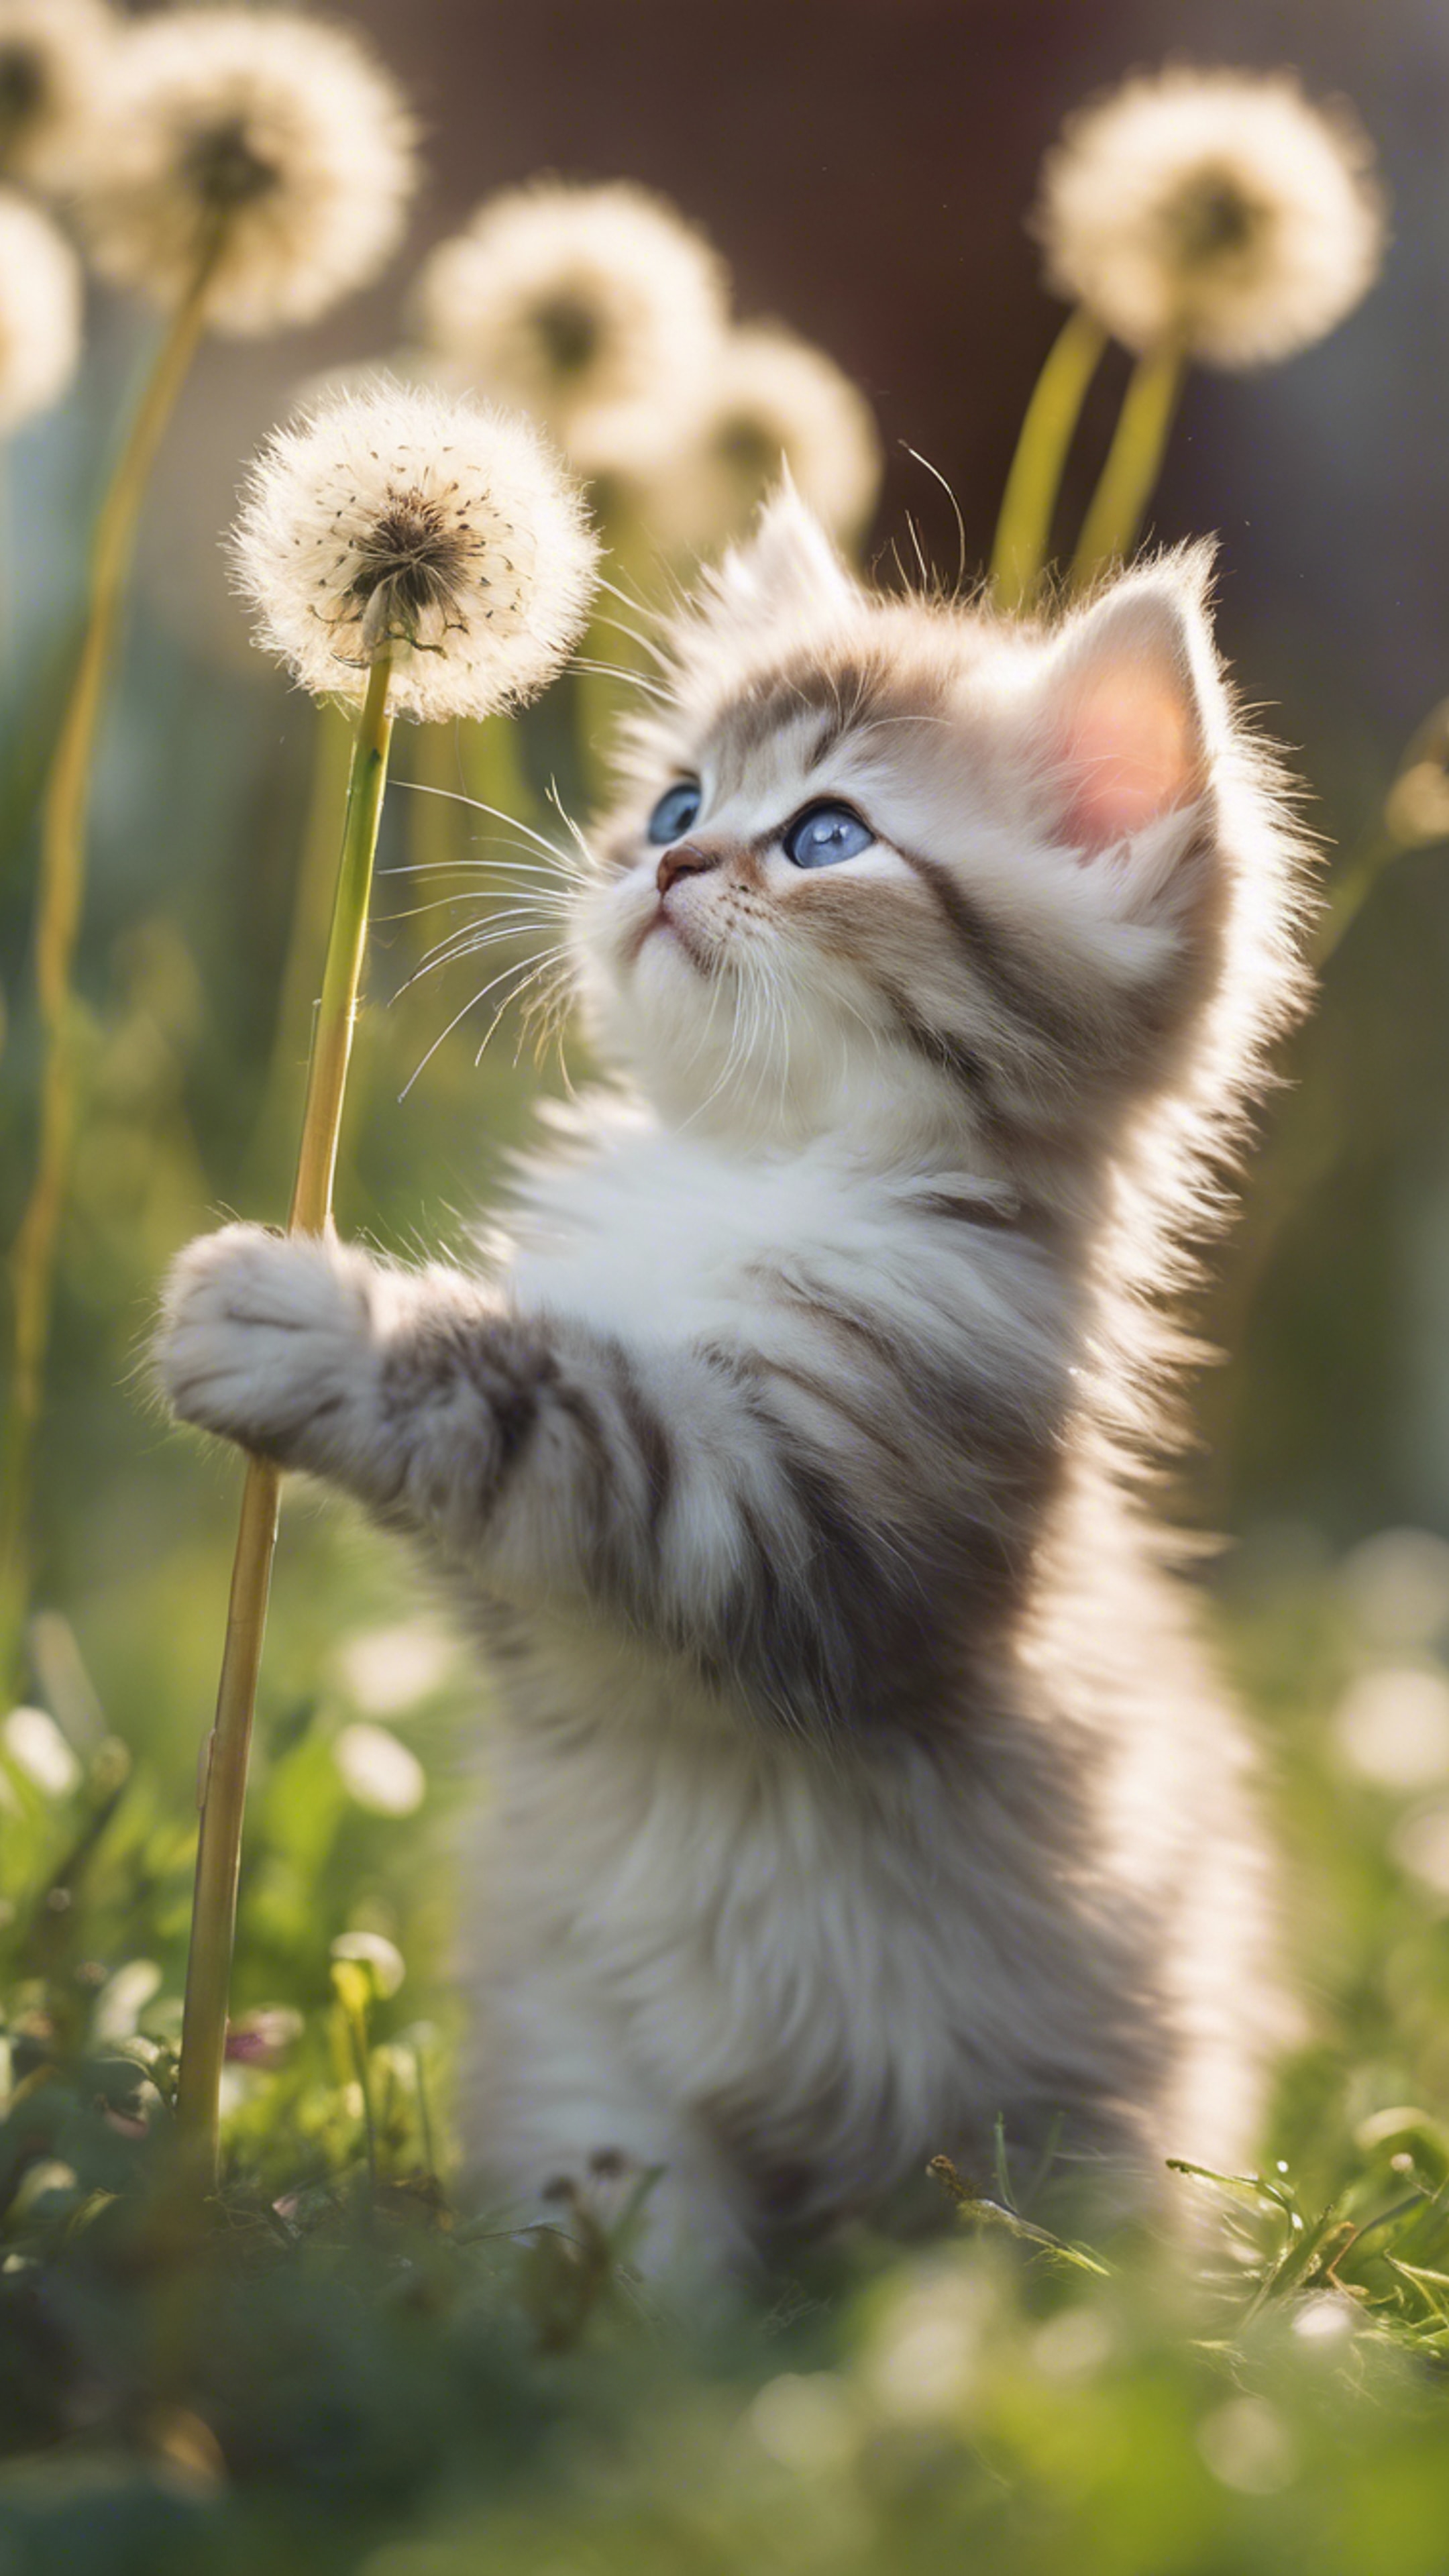 A curious Persian kitten playfully batting at a dandelishion puff in the midst of spring bloom. Hình nền[a1f5779e66044a4f83a1]